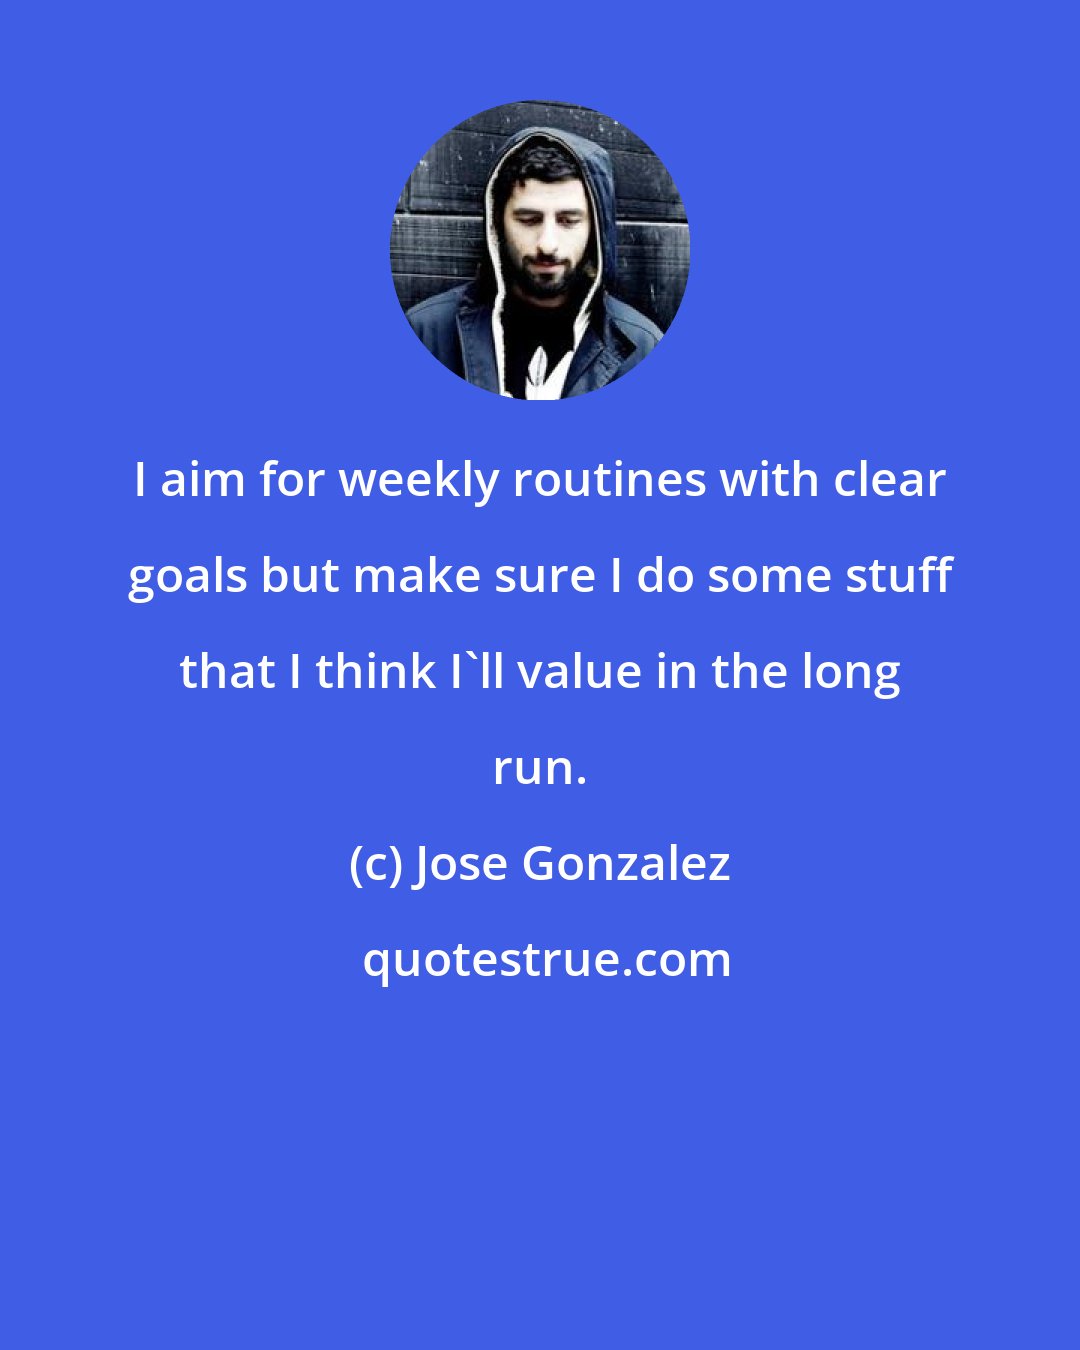 Jose Gonzalez: I aim for weekly routines with clear goals but make sure I do some stuff that I think I'll value in the long run.